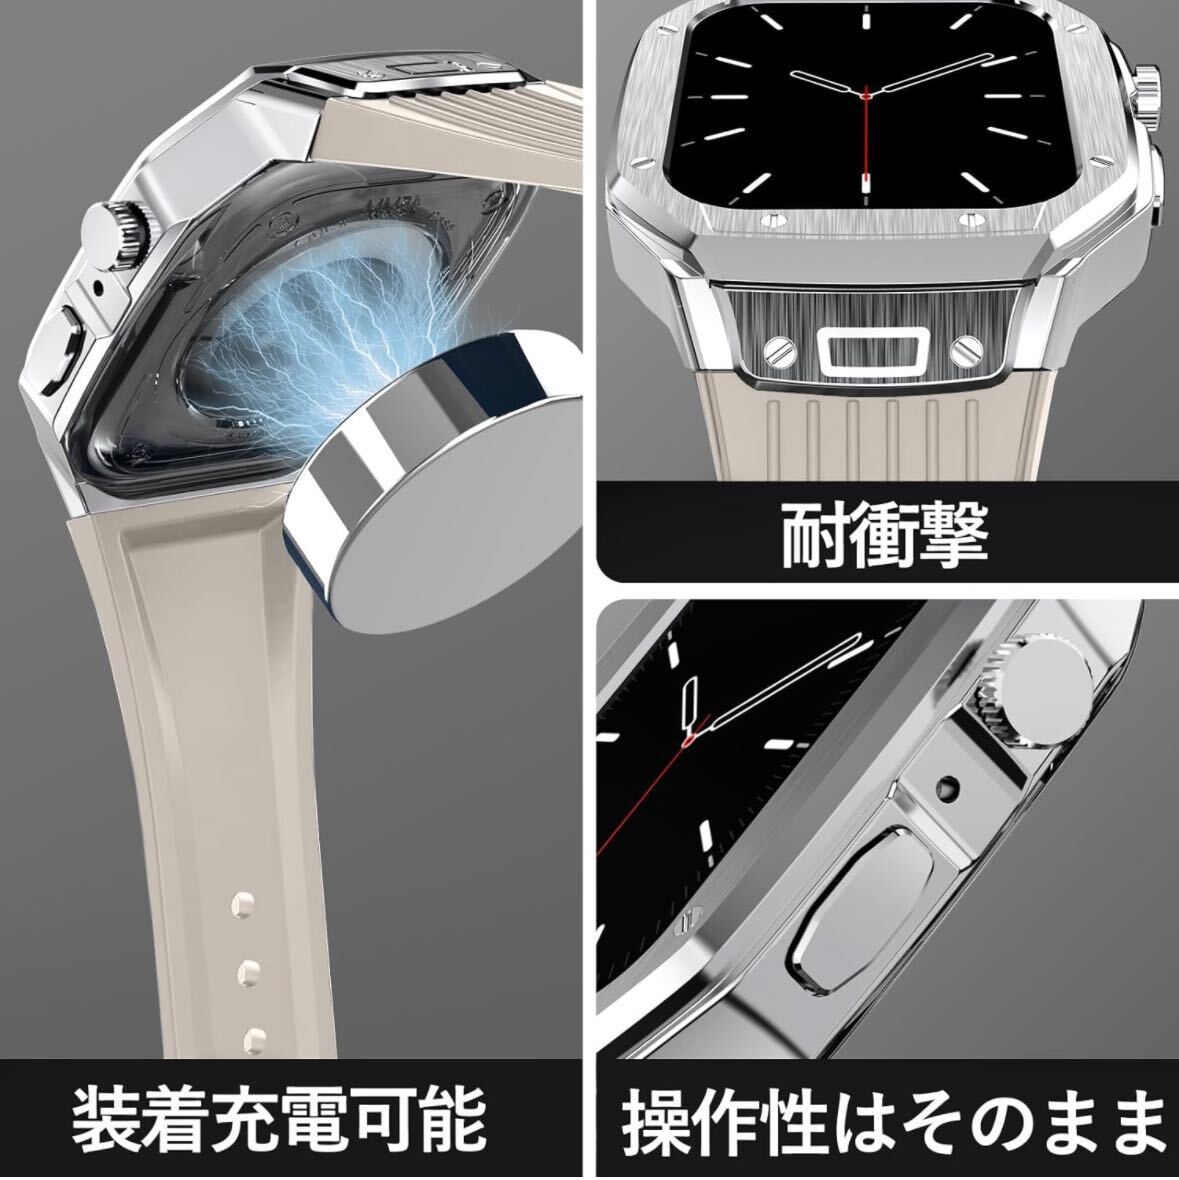 ③ Apple Watch 3in1 one body design band with cover apple watch accessory 45mm/44mm, silver case . Star light belt )